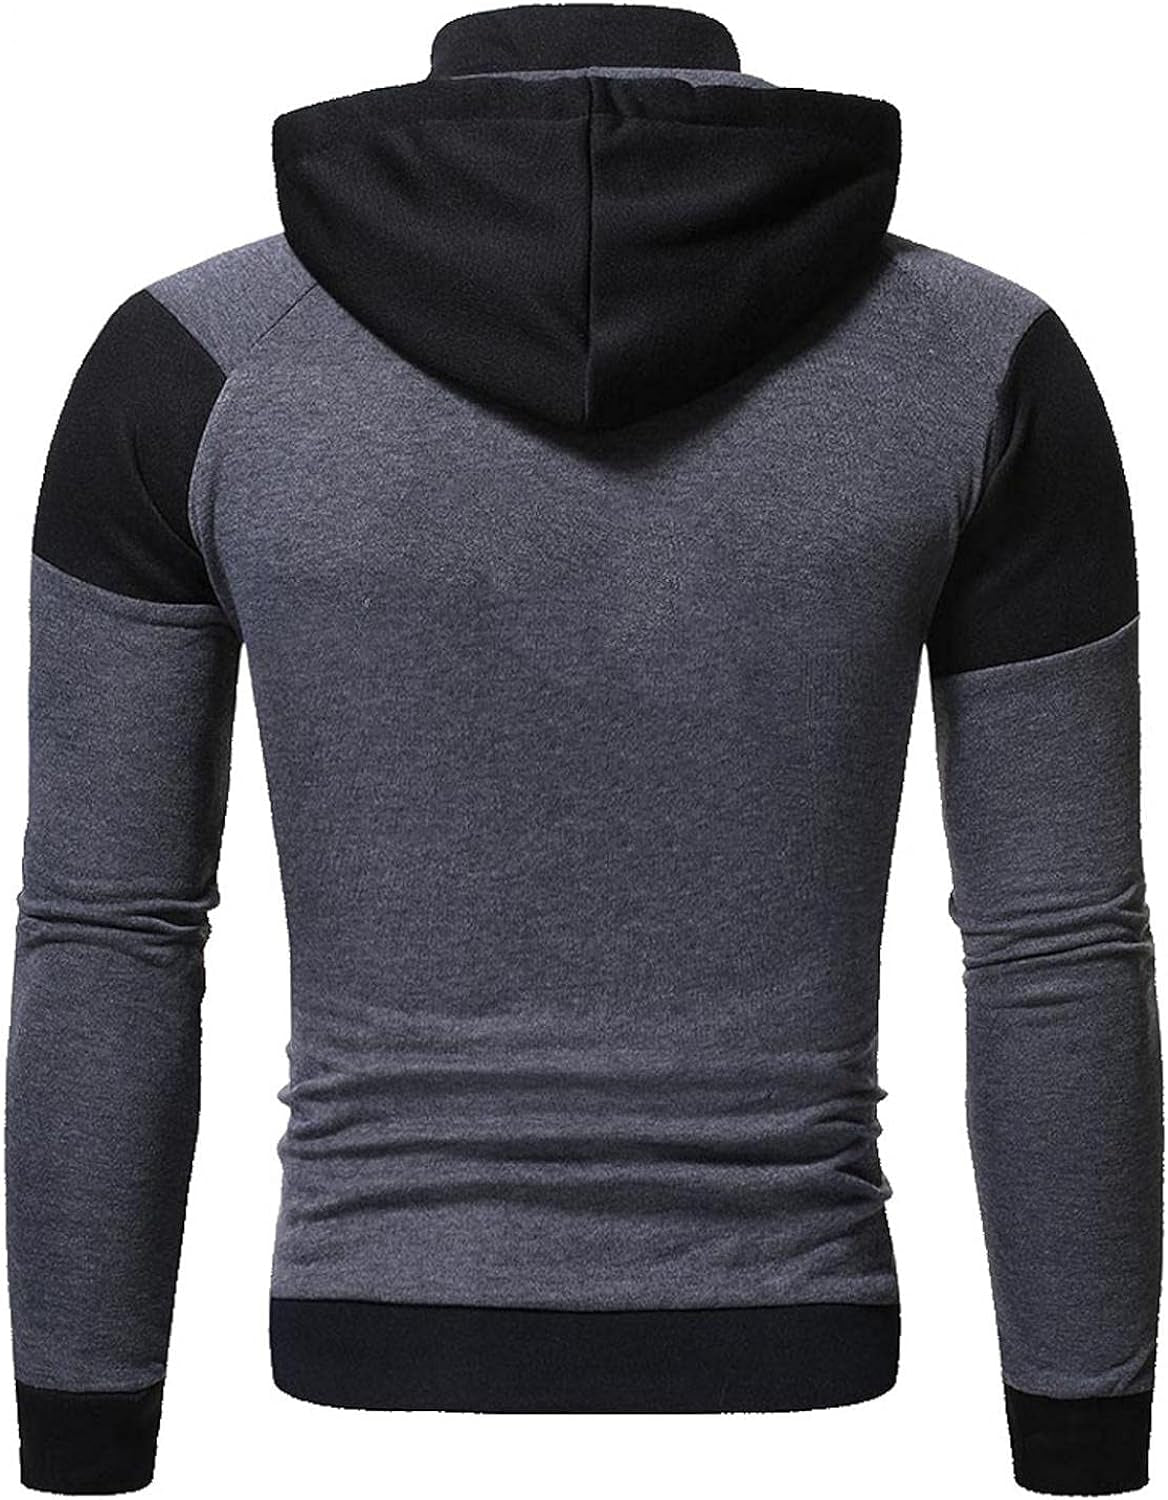 Professional title: Men's Colorblock Hoodies for Workout and Sport - Zip Up Athletic Jackets